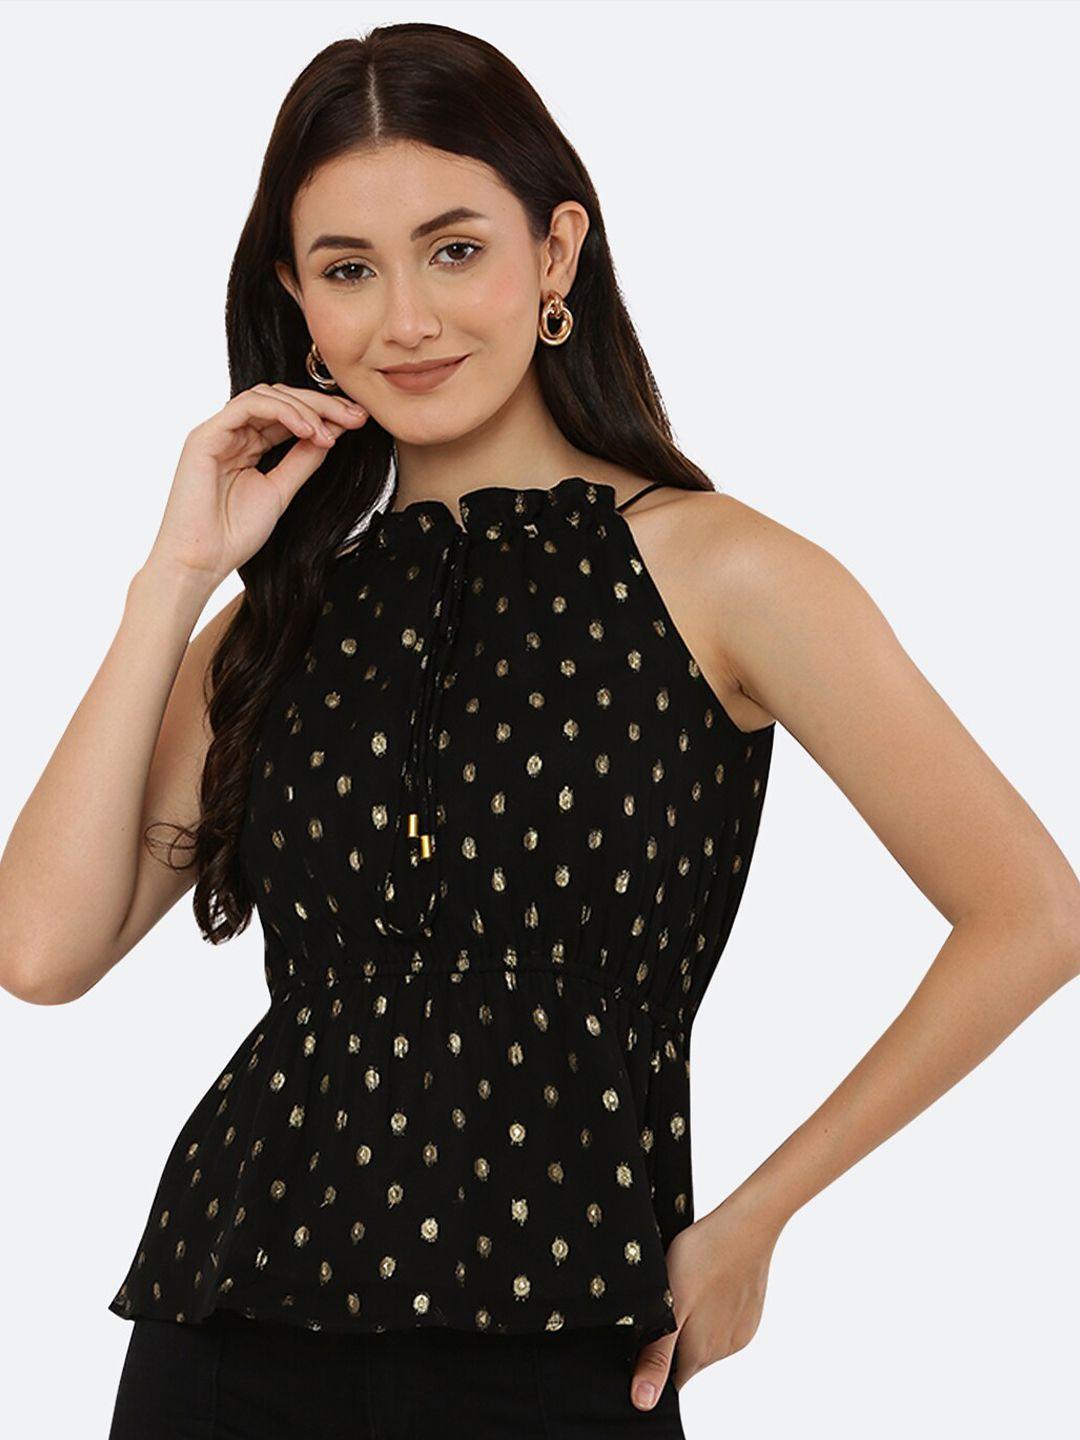 raassio black & gold-toned printed halter neck georgette cinched waist top